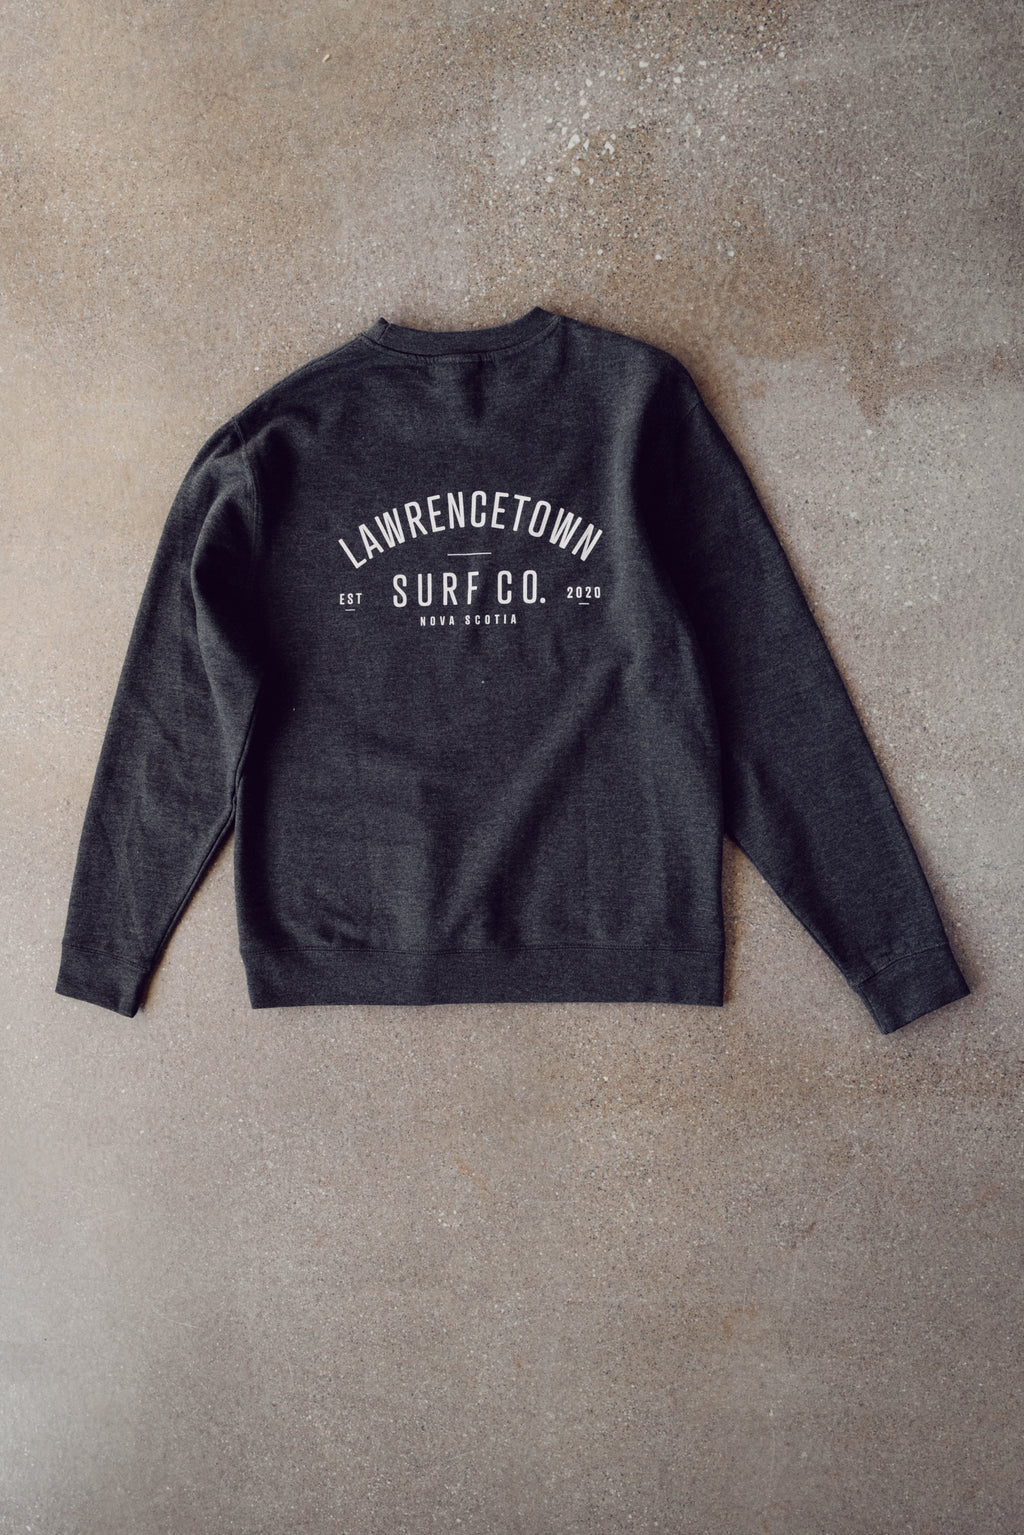 Adult Crewneck Sweater - Charcoal Grey / White